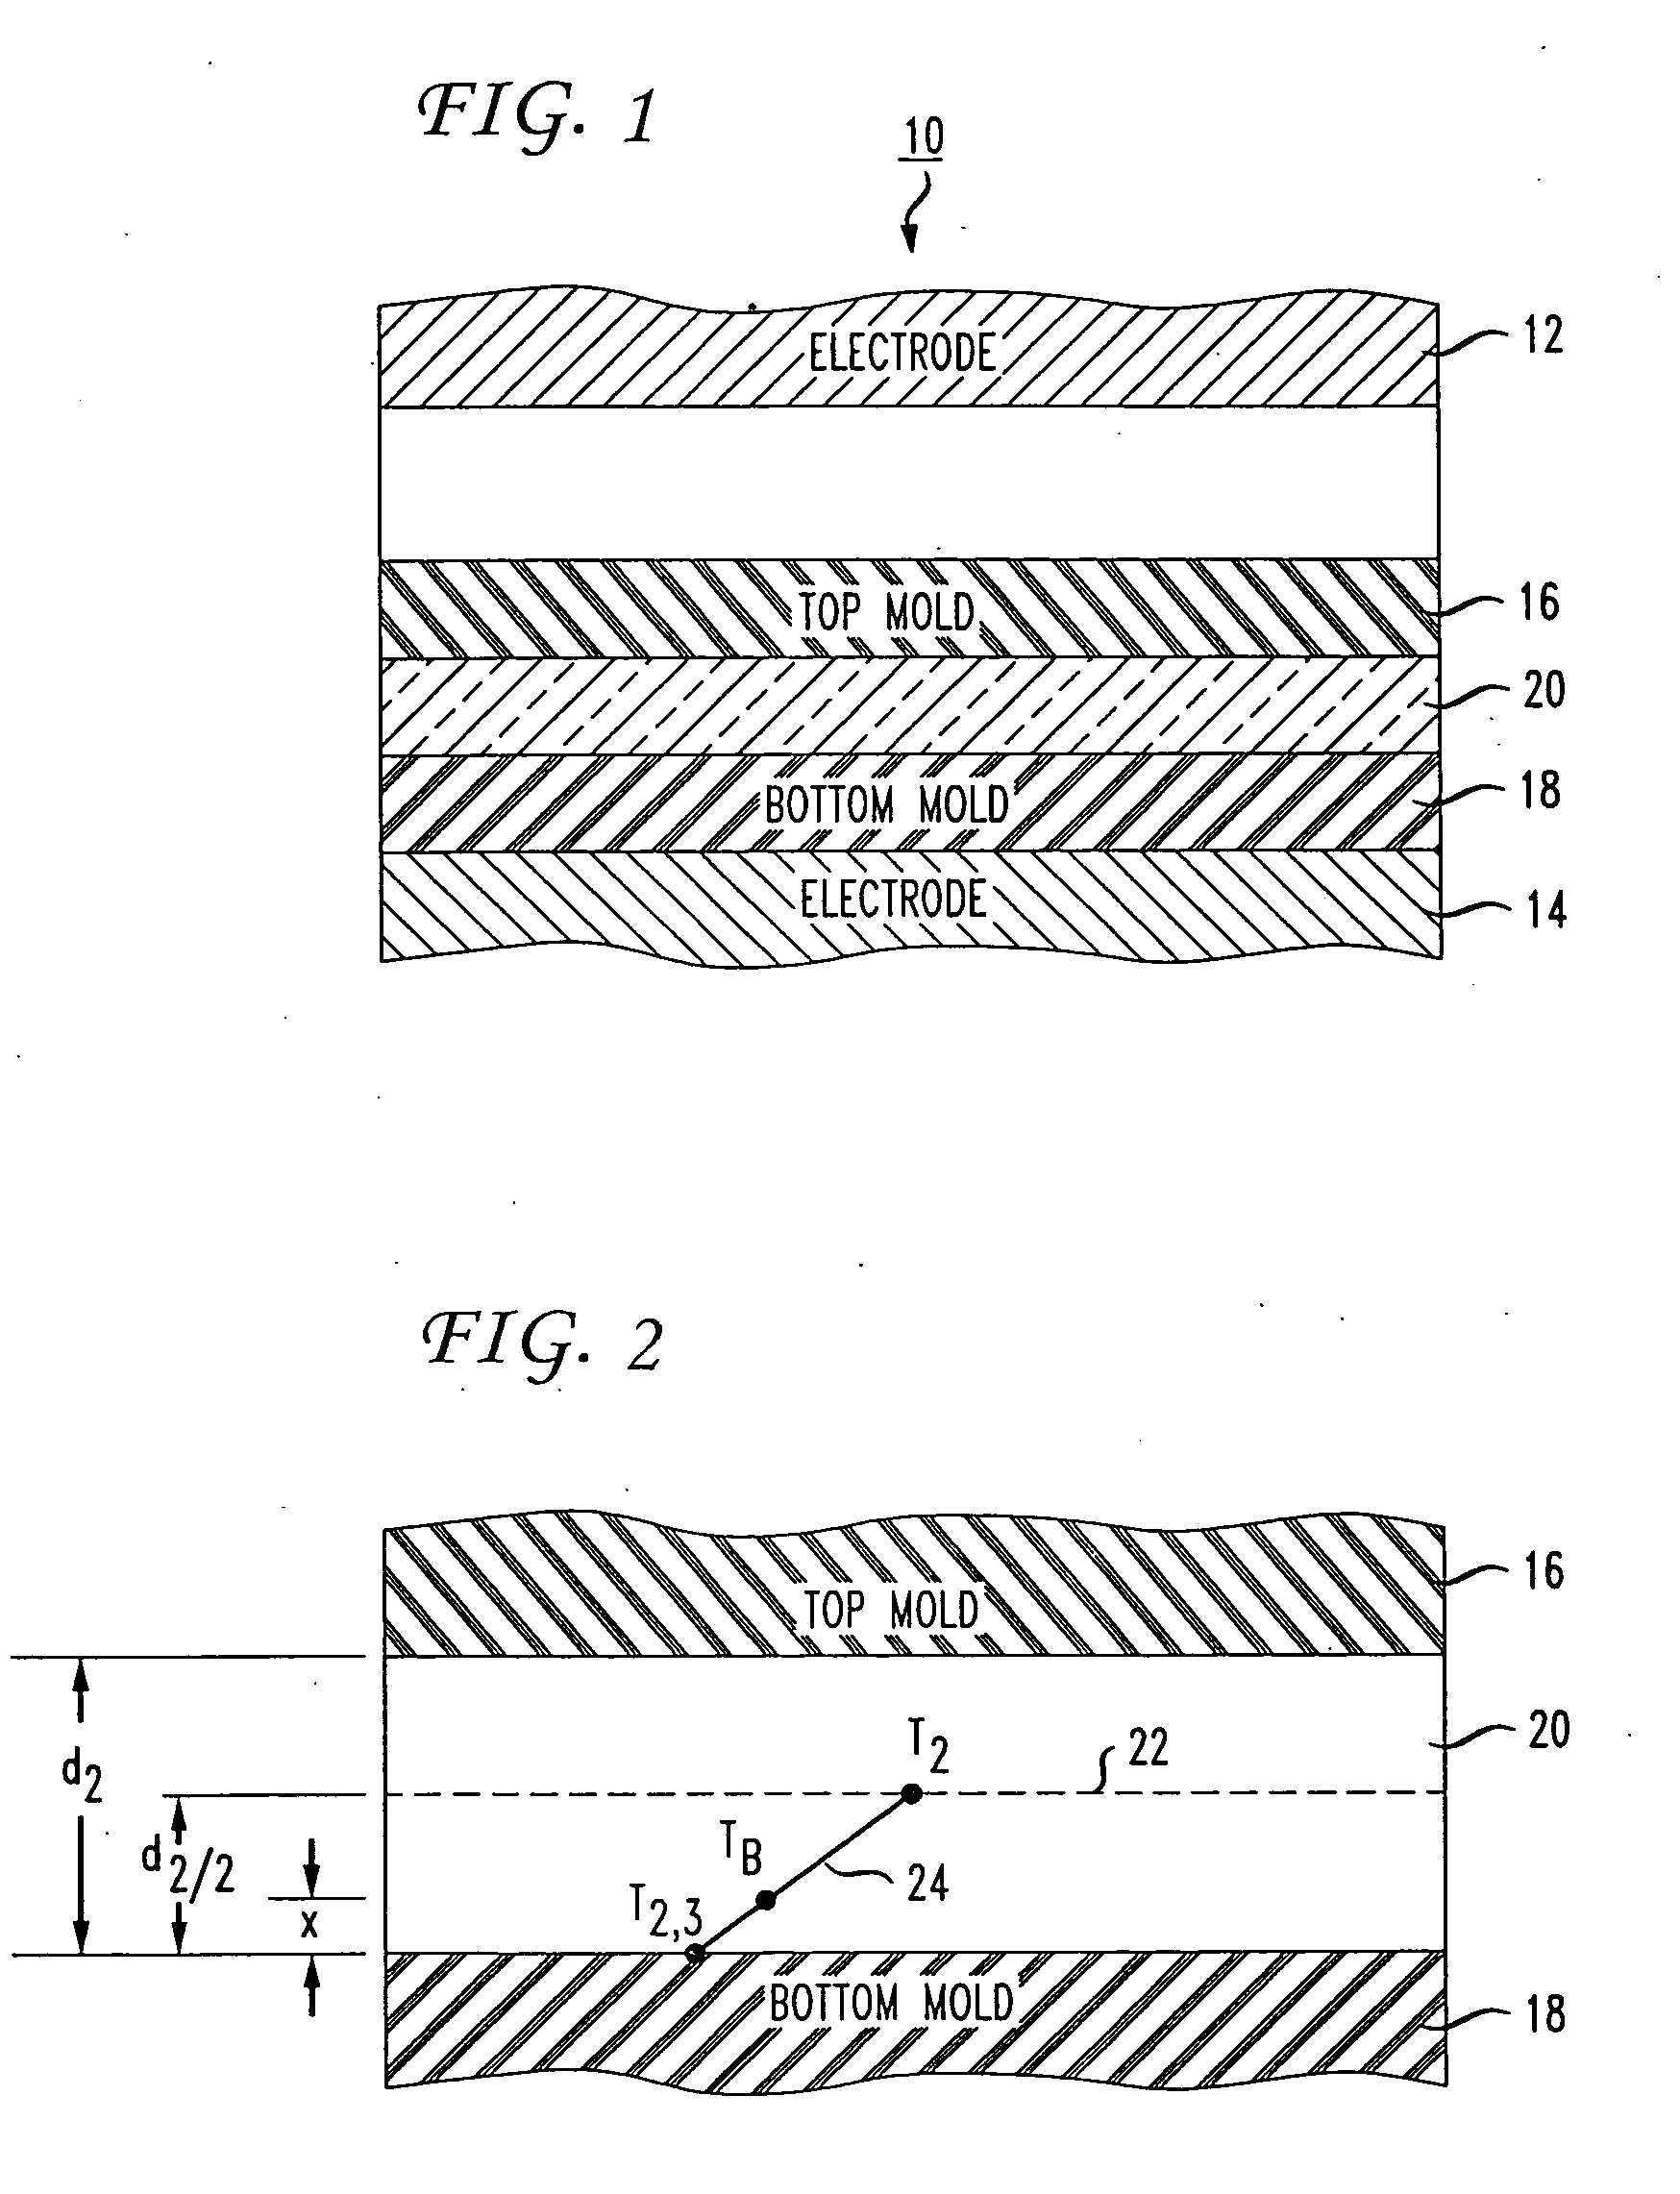 Method of Forming a Hardened Skin on a Surface of a Molded Article